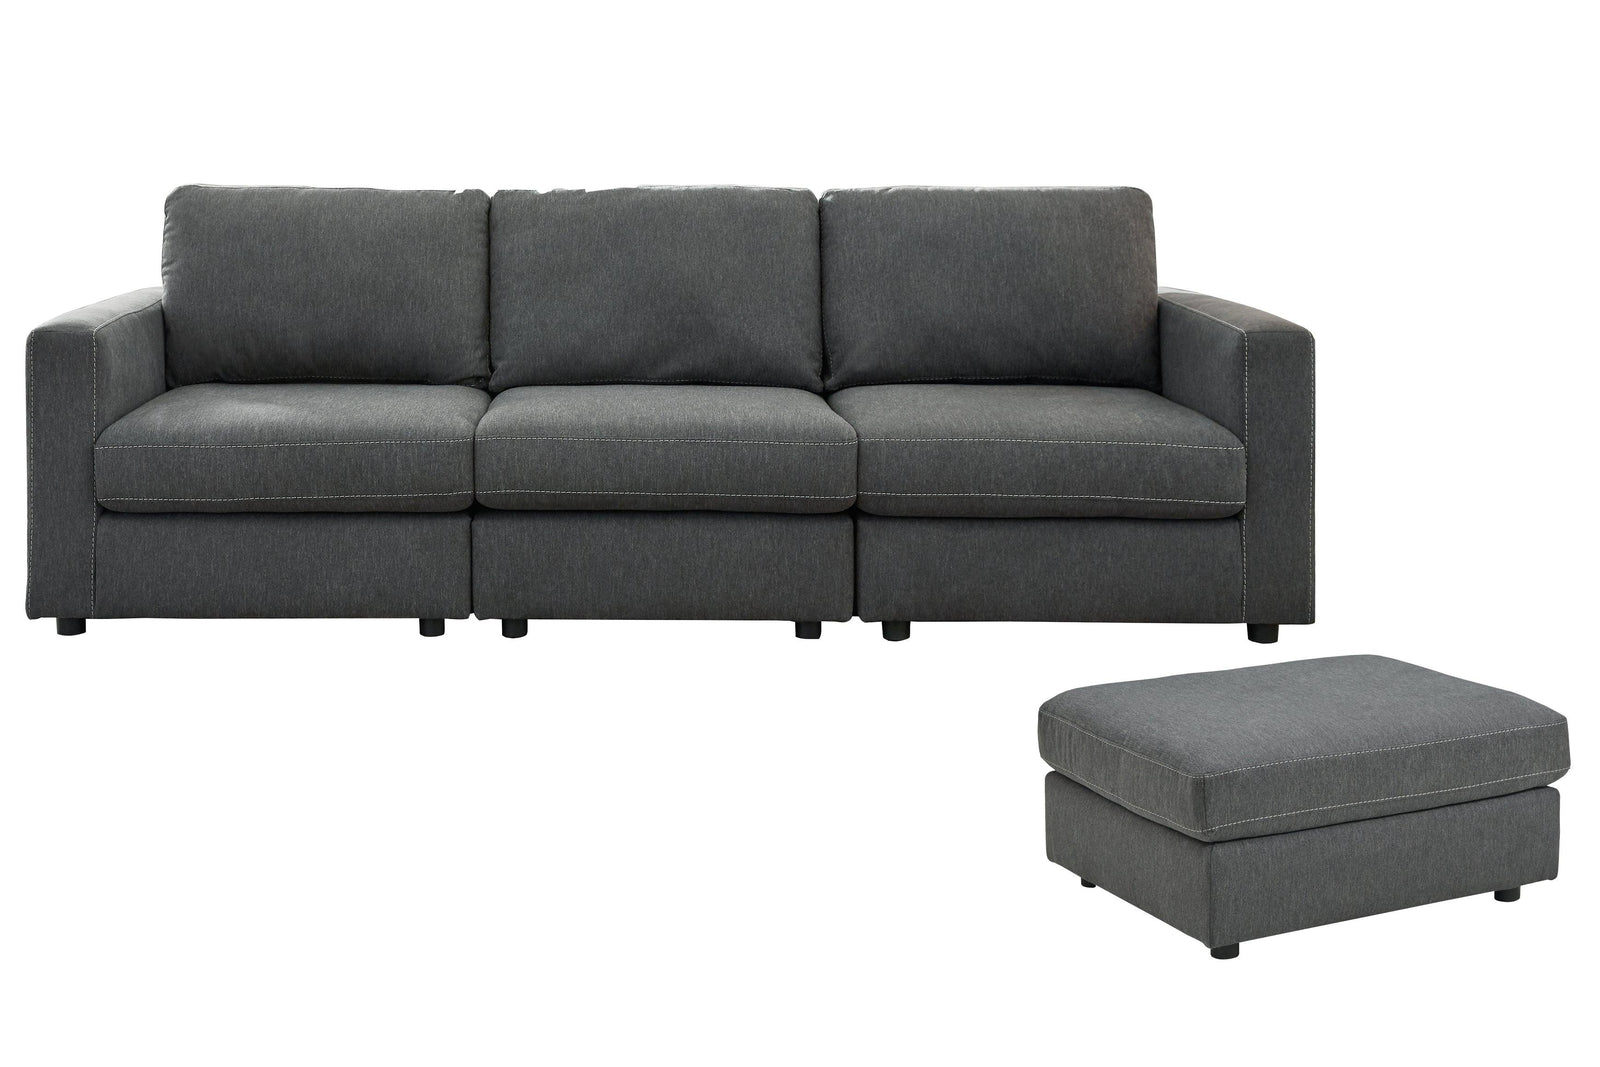 Candela Charcoal 3-Piece Sectional With Ottoman